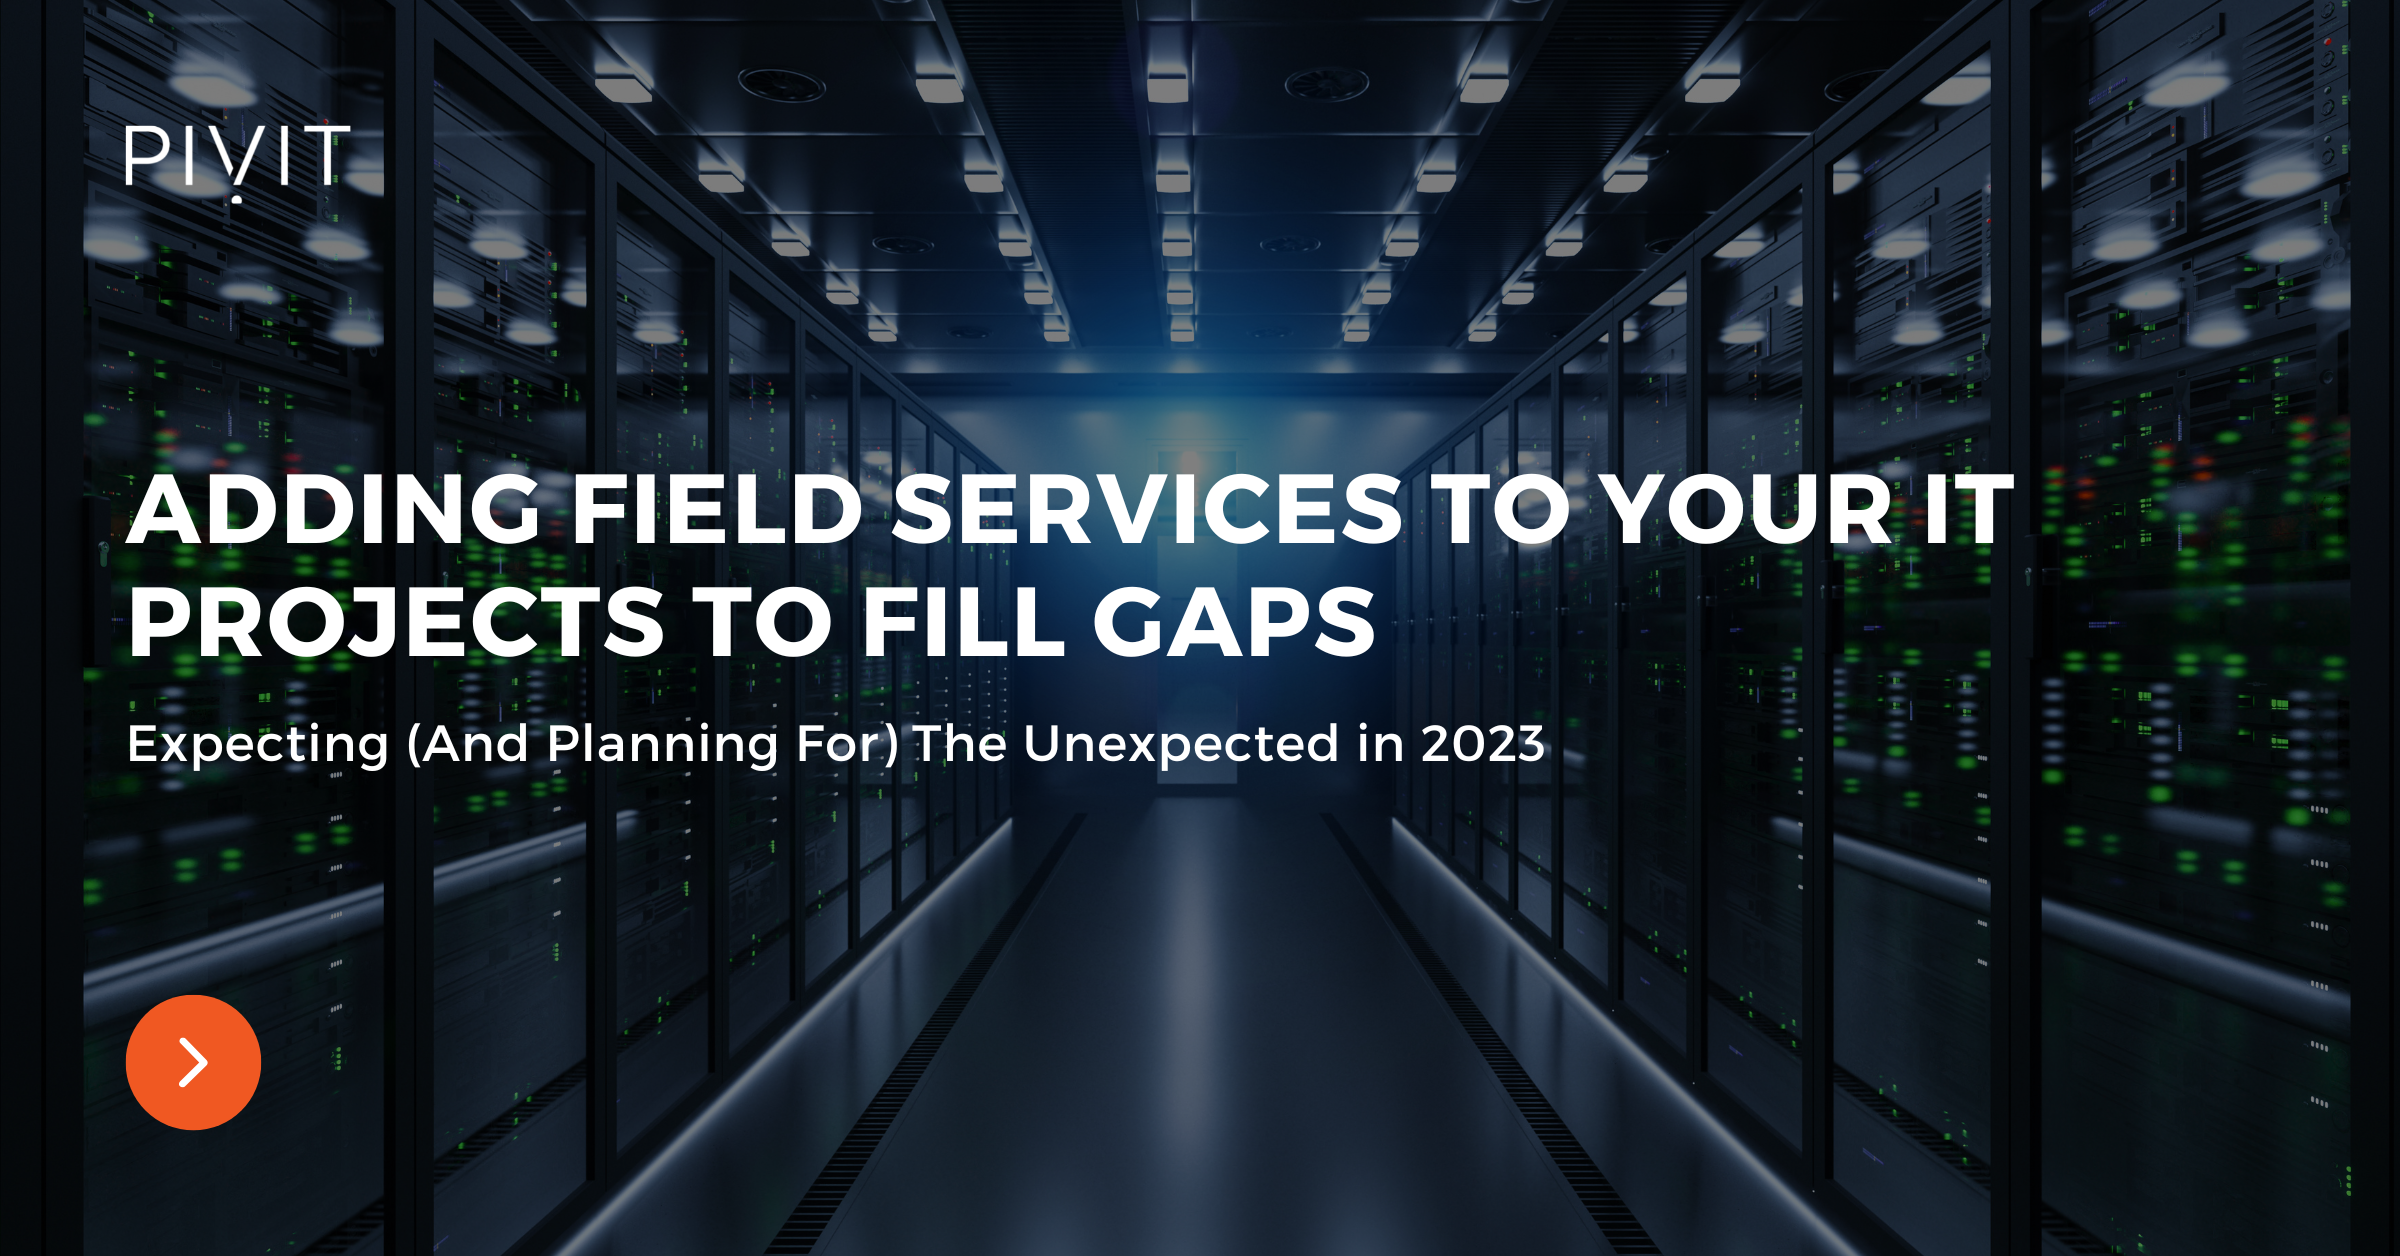 Adding Field Services to Your IT Projects to Fill Gaps